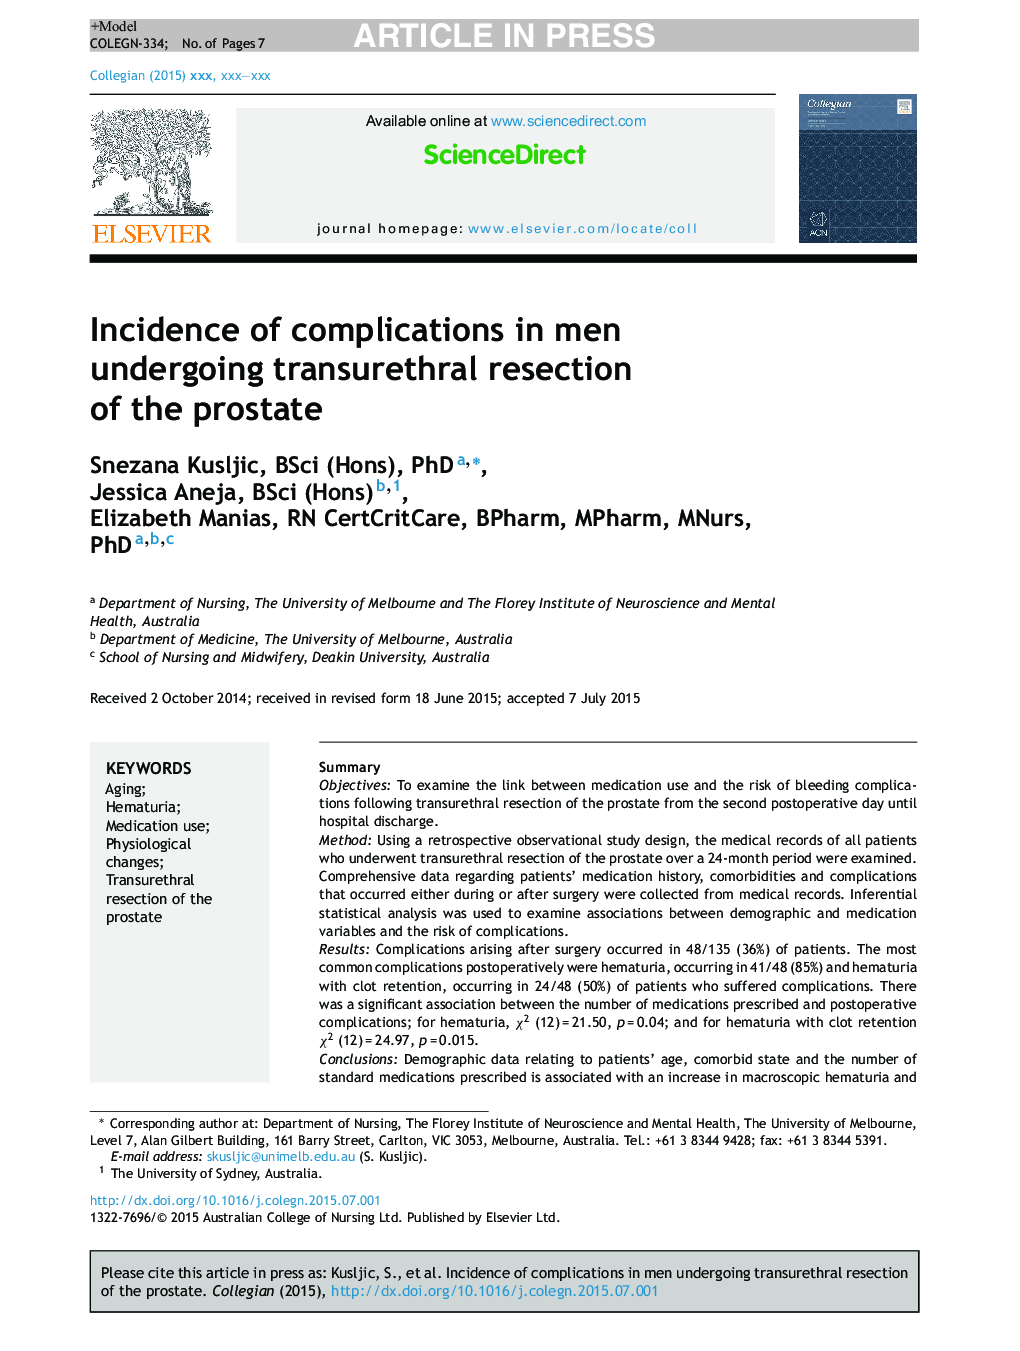 Incidence of complications in men undergoing transurethral resection of the prostate